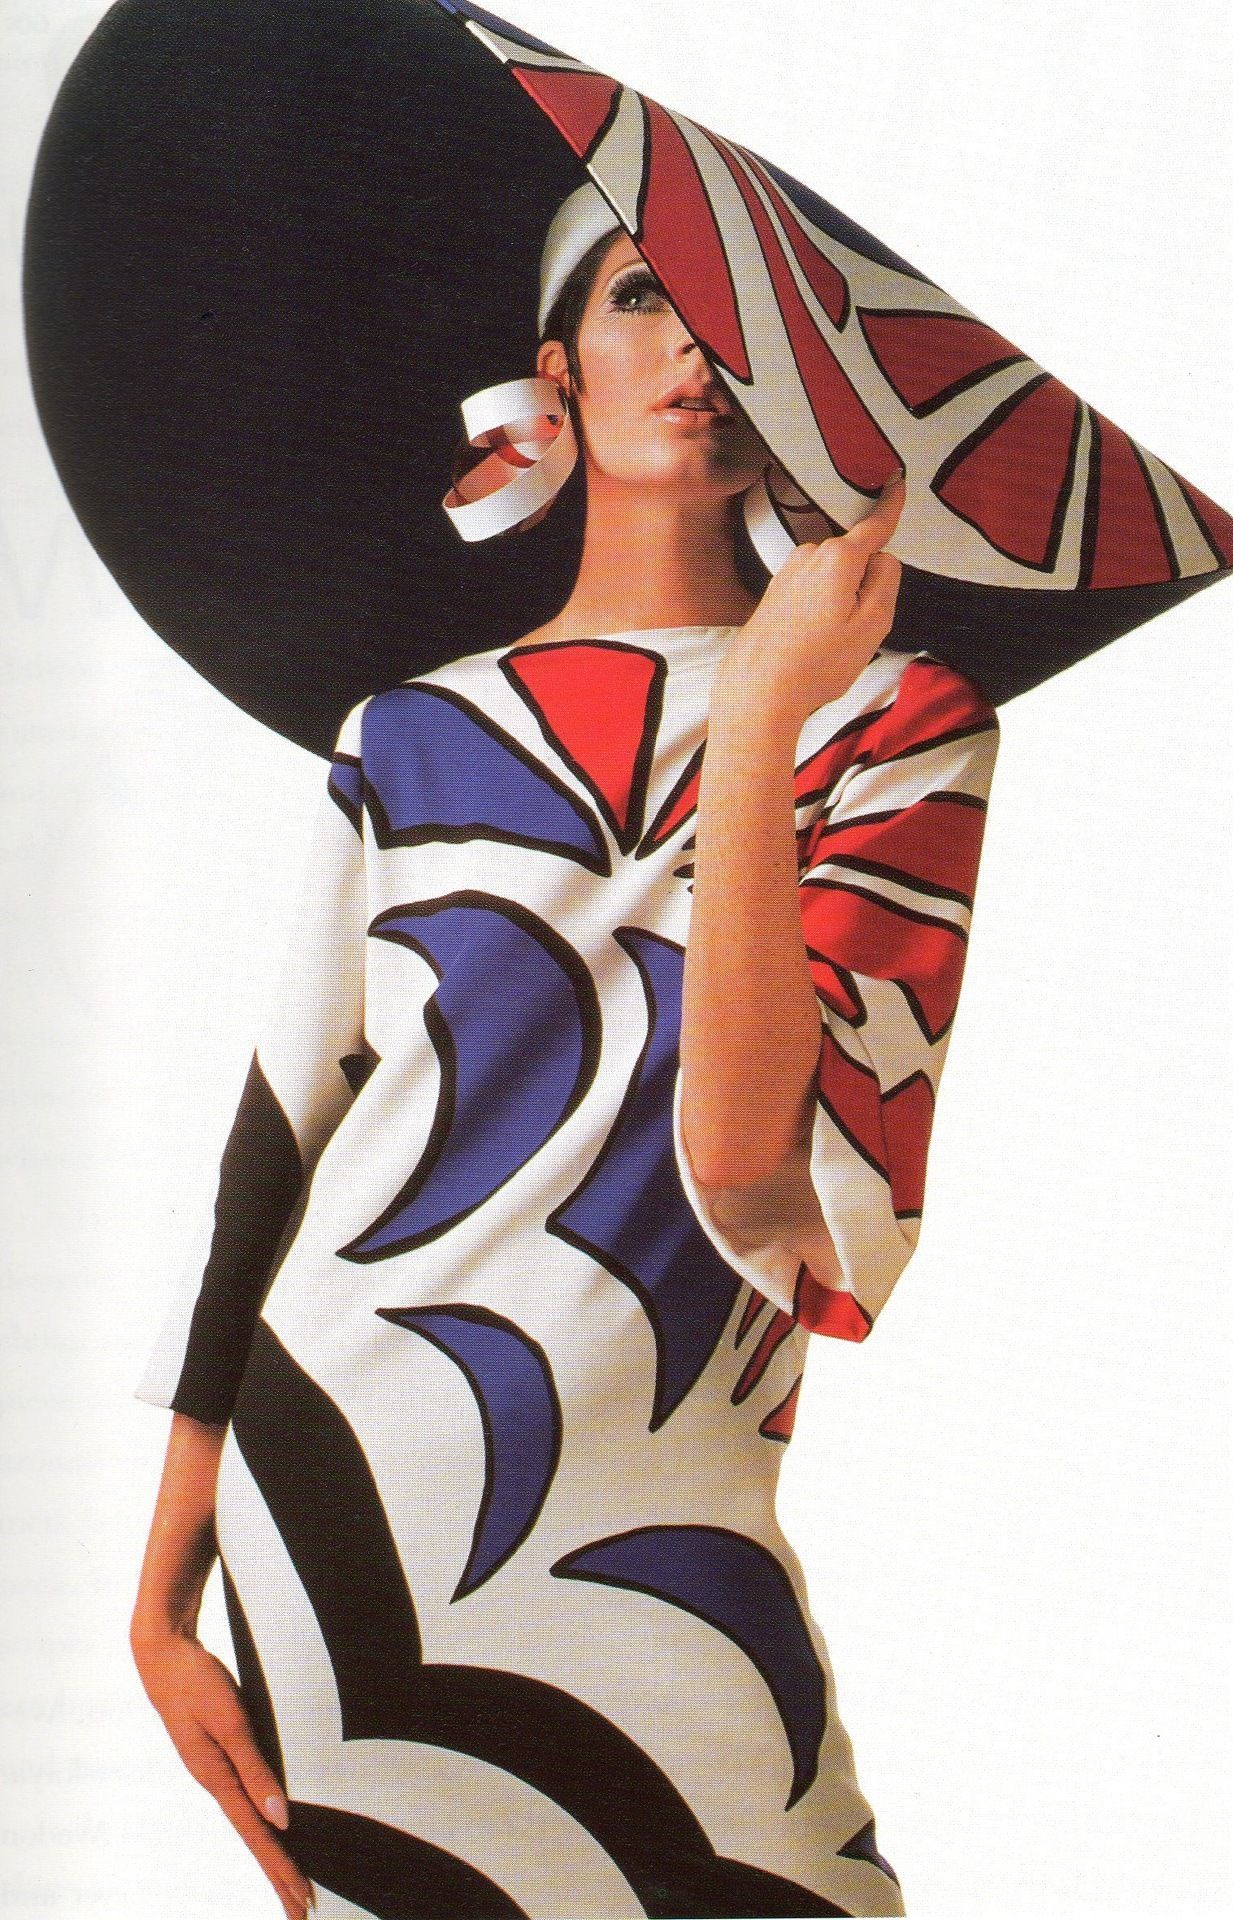 Like Jeanne Lanvin and Coco Chanel, Halston started his career as a milliner. He designed this oversized sun hat in 1967. Photo